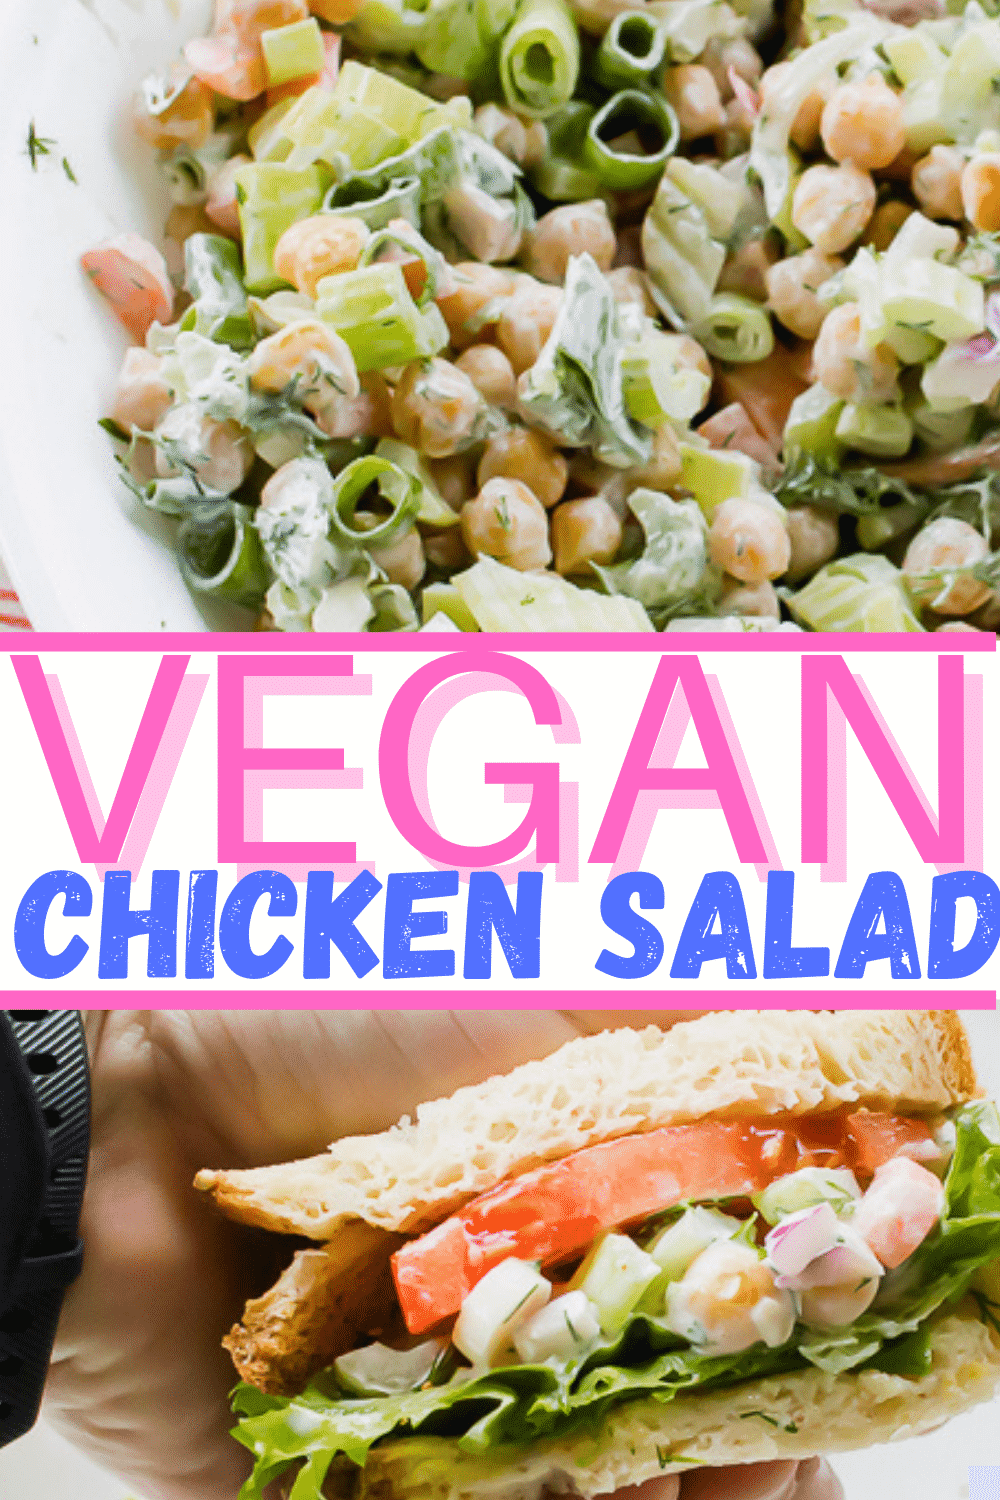 Vegan Chicken Salad is the best no-cook weeknight dinner! Pair it with soups in the winter or enjoy the cold chickpea salad plain in summer. #vegan #chickpeasalad #nocooking